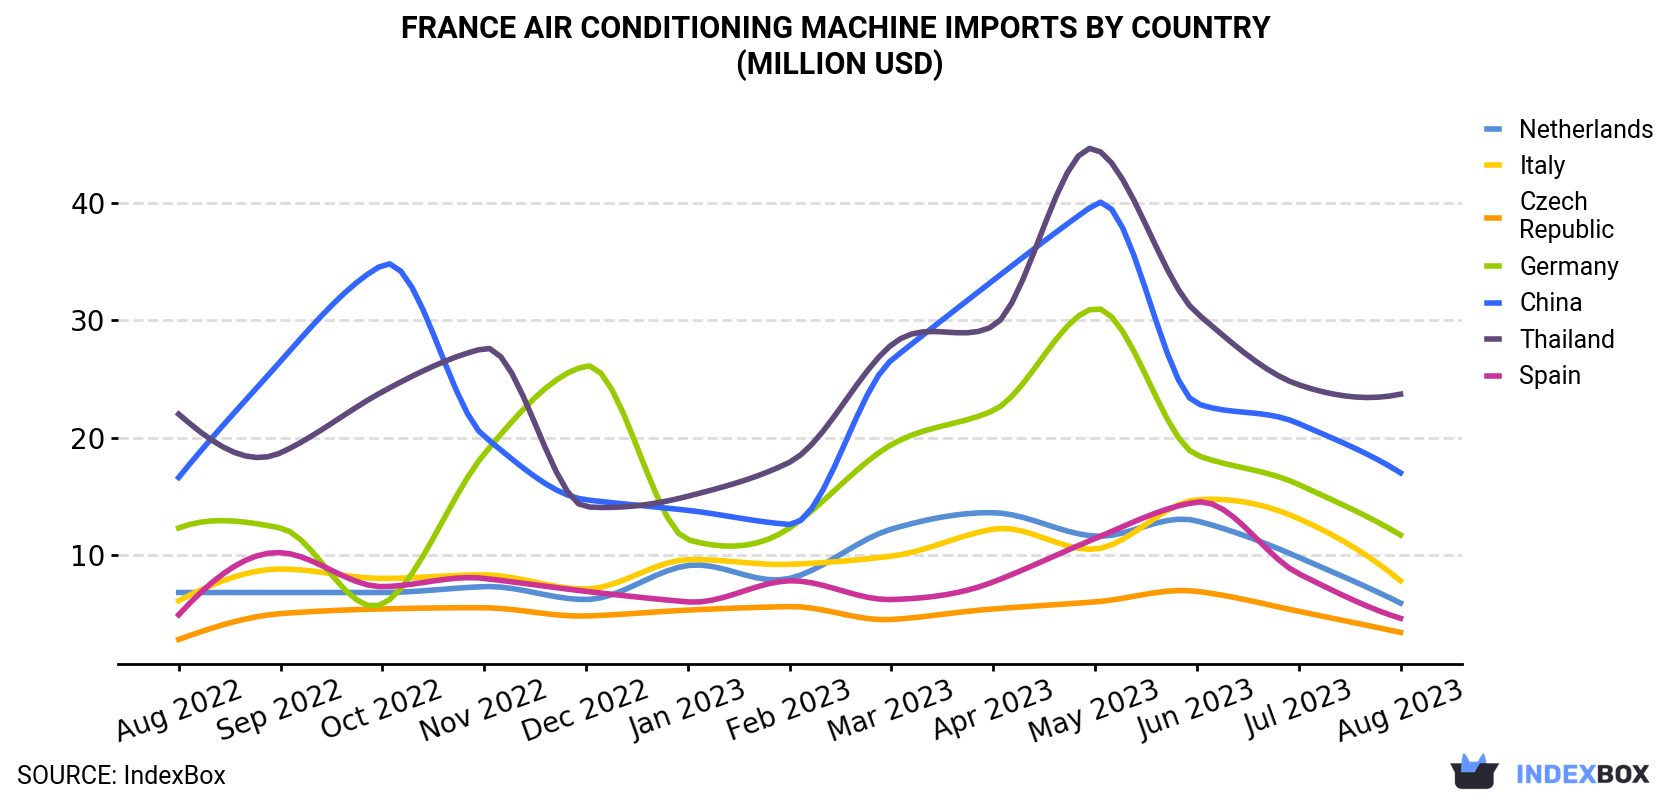 France Air Conditioning Machine Imports By Country (Million USD)